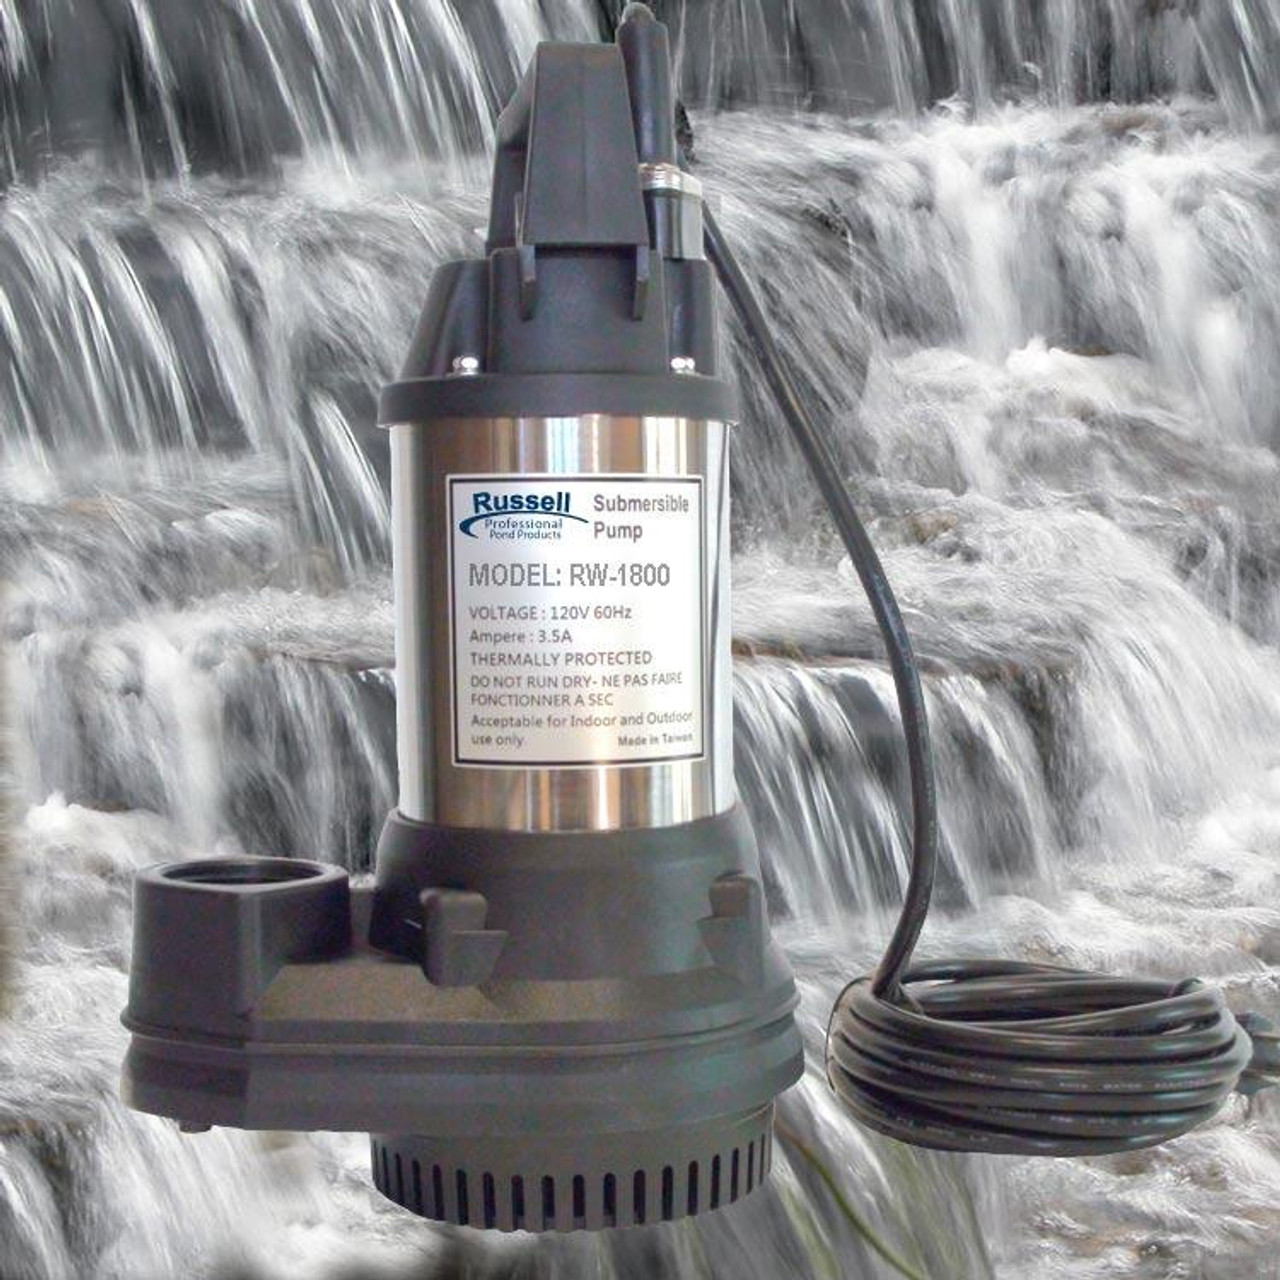 The Russell Watergardens RW-1800 Pond and Waterfall Pump is a reliable and dependable submersible pump. 